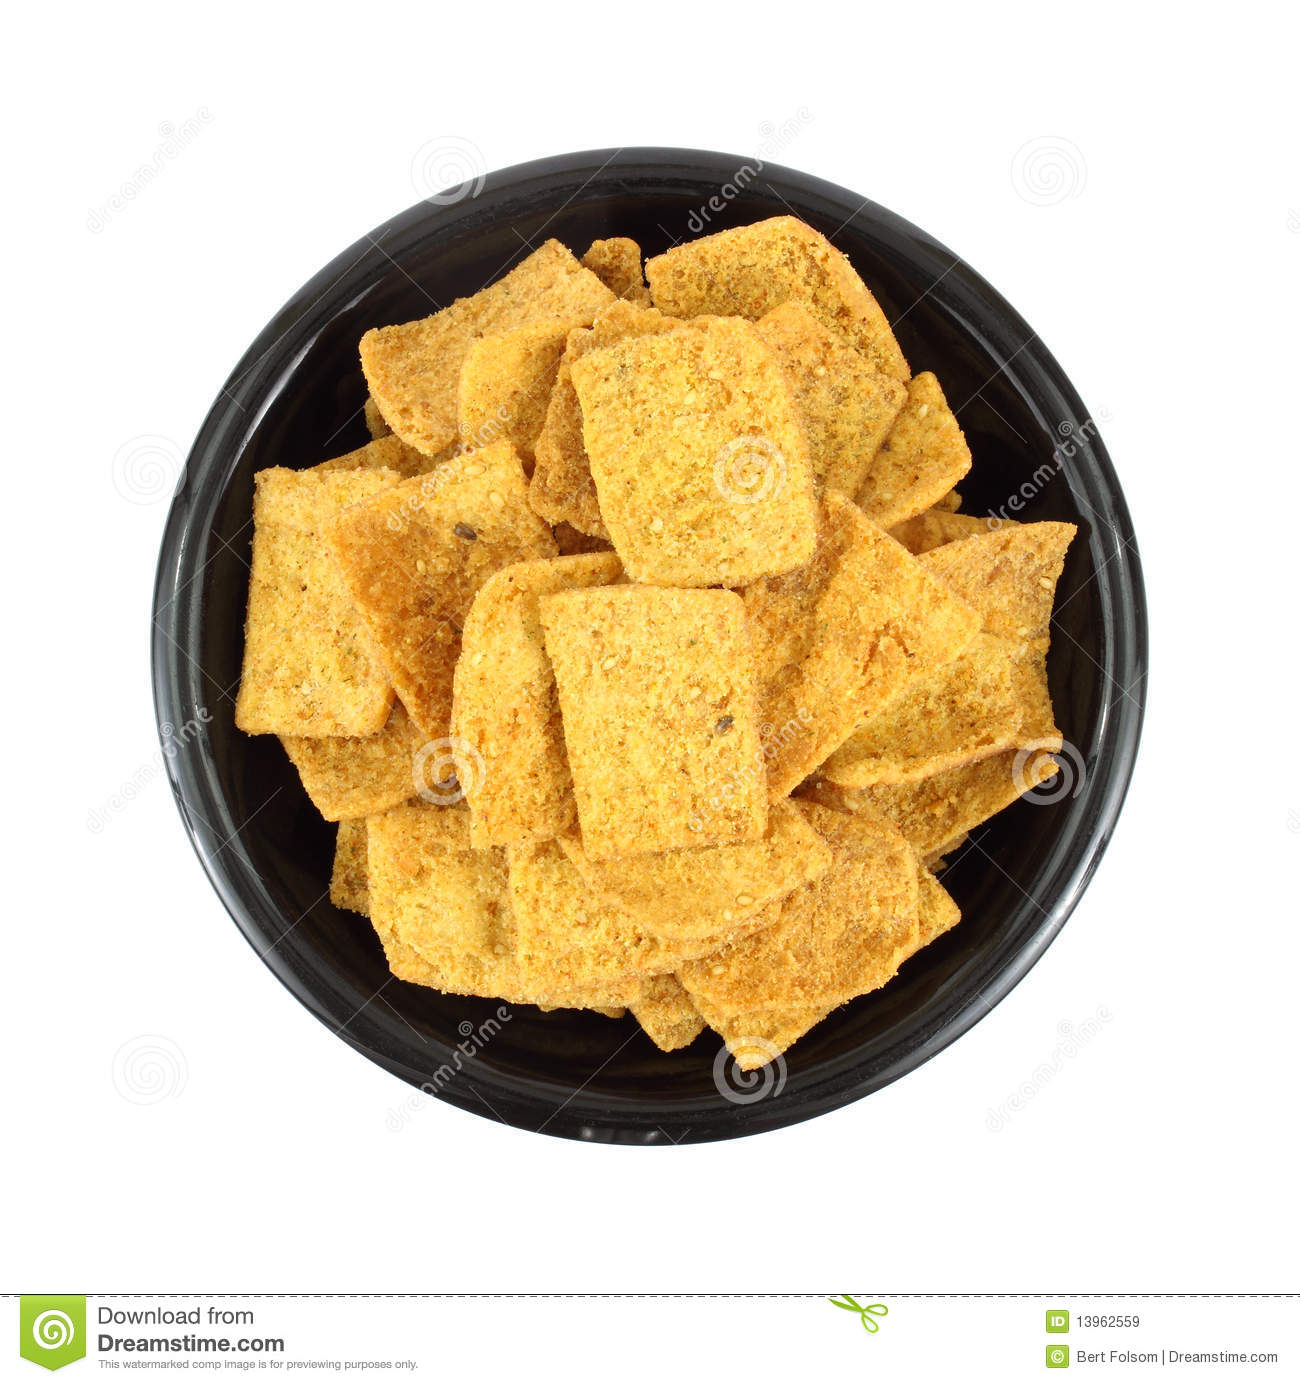 Pita Chips In A Black Bowl Royalty Free Stock Images   Image  13962559